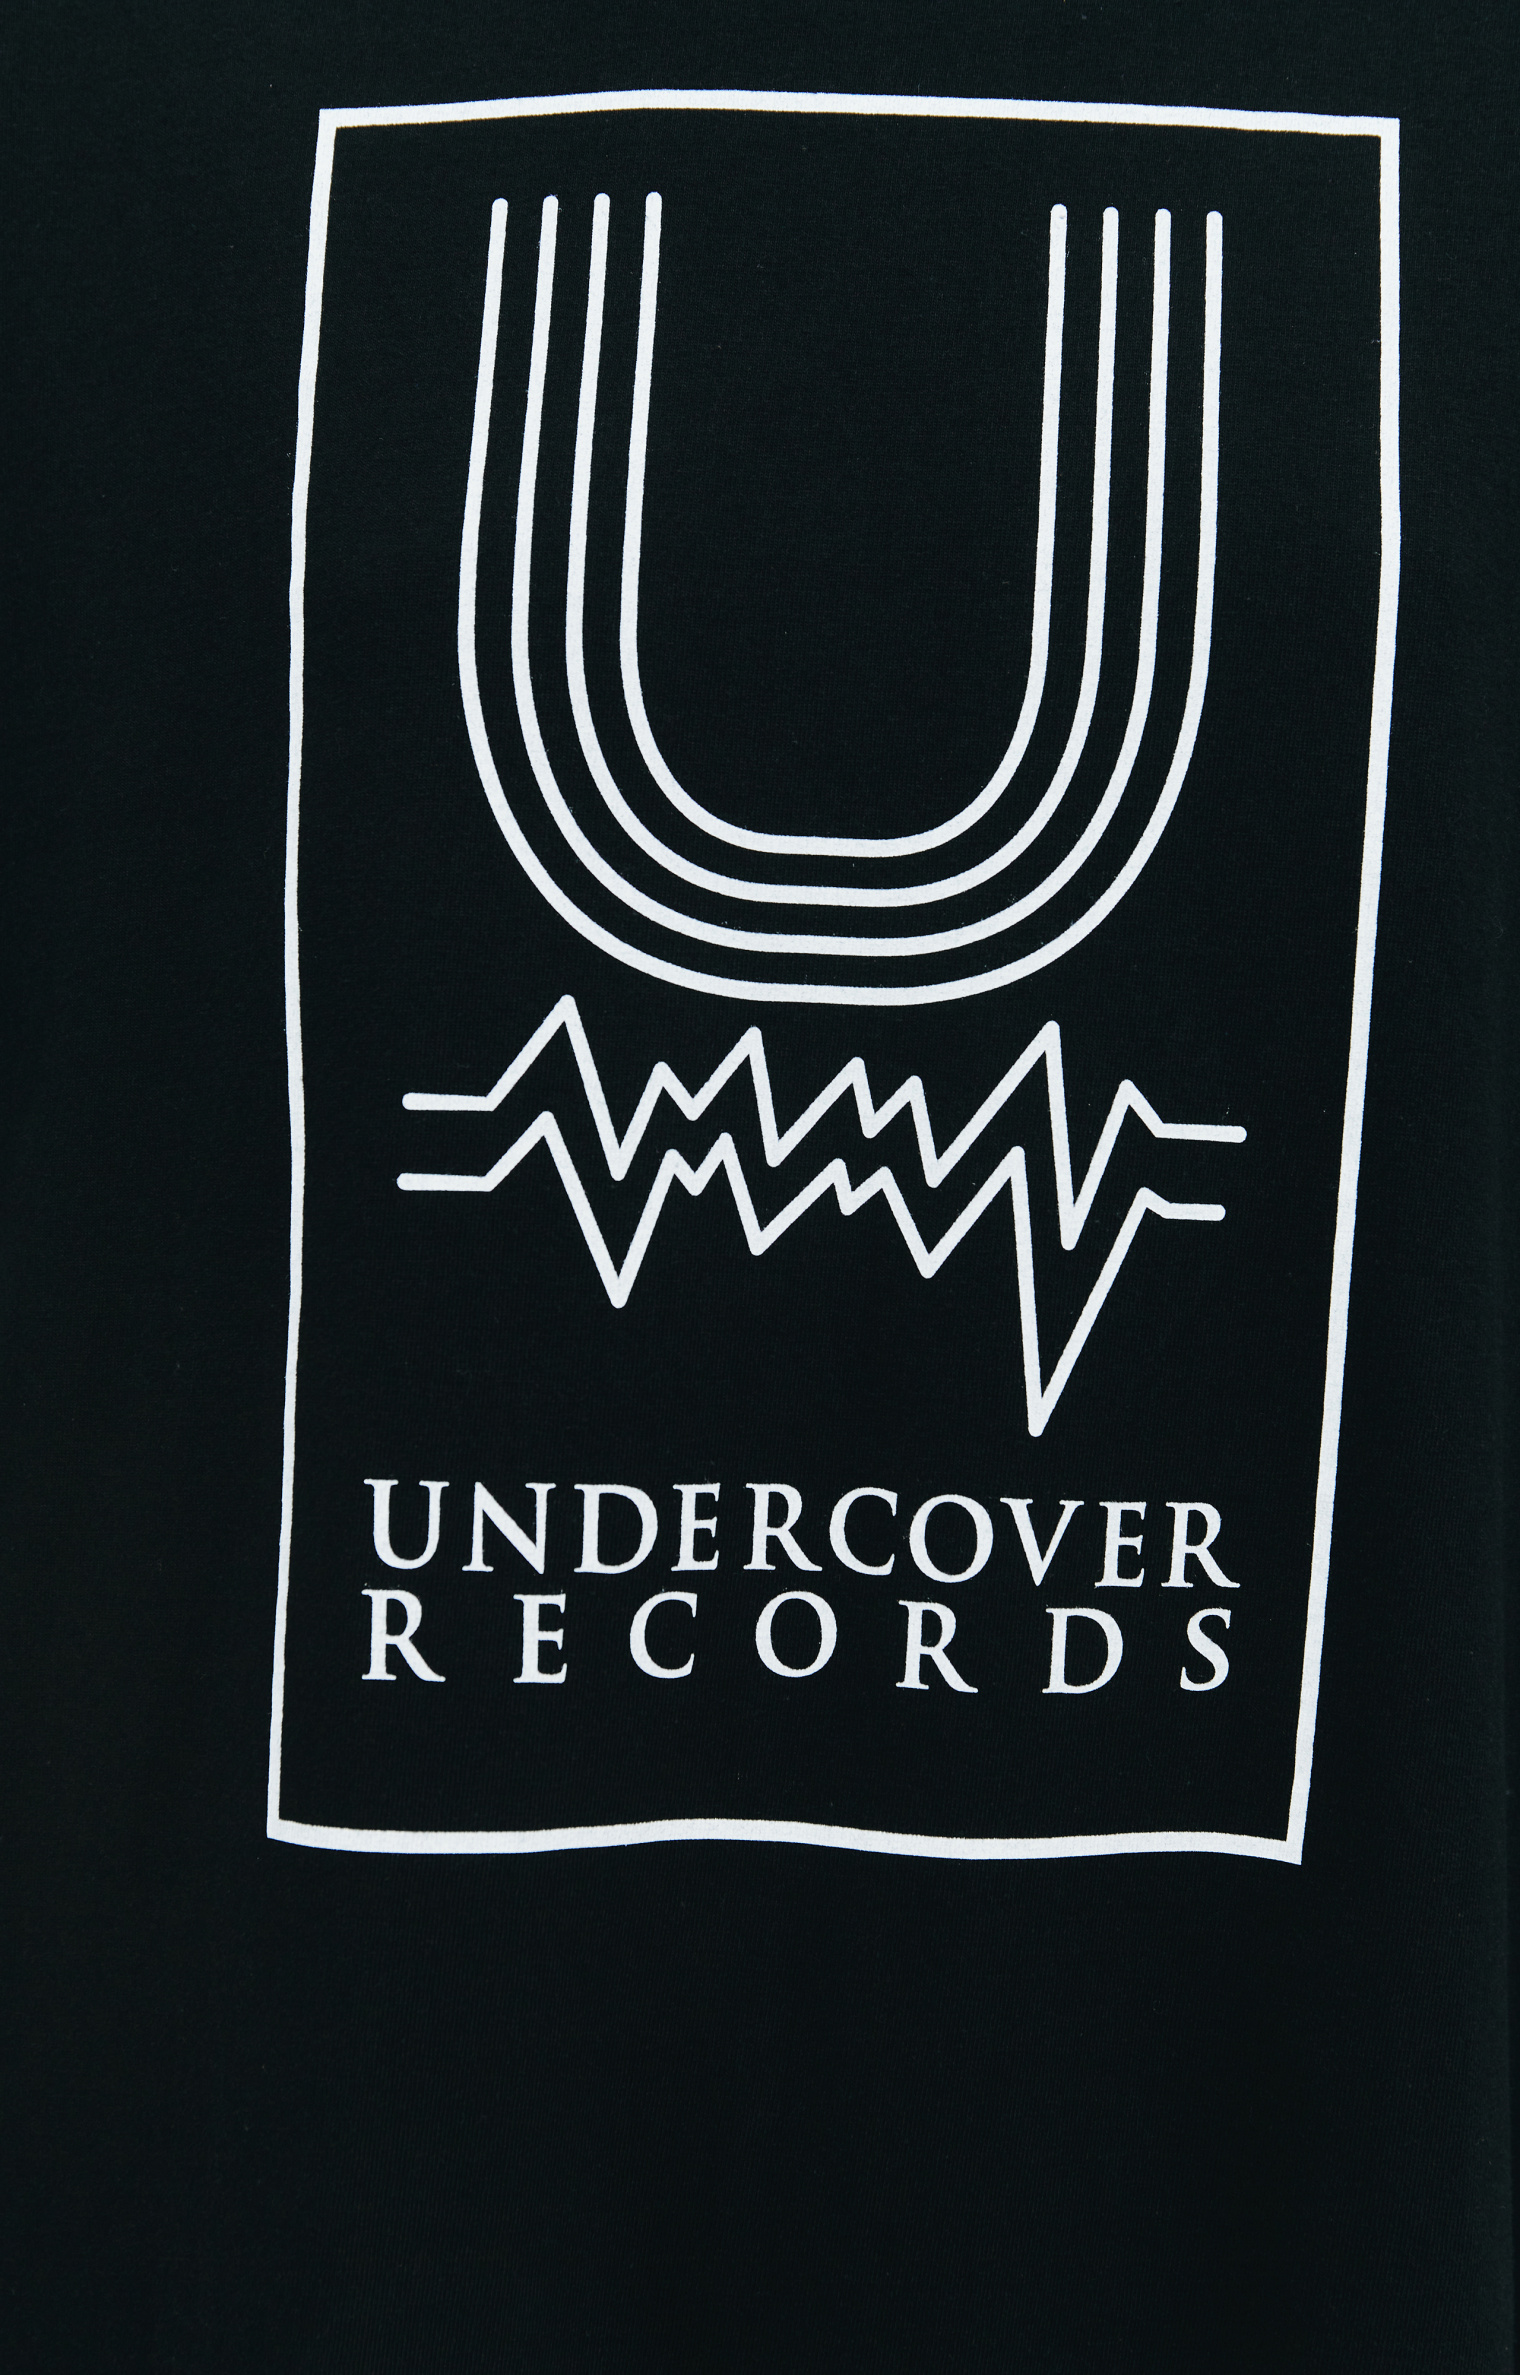 Undercover Black Undercover Records t-shirt